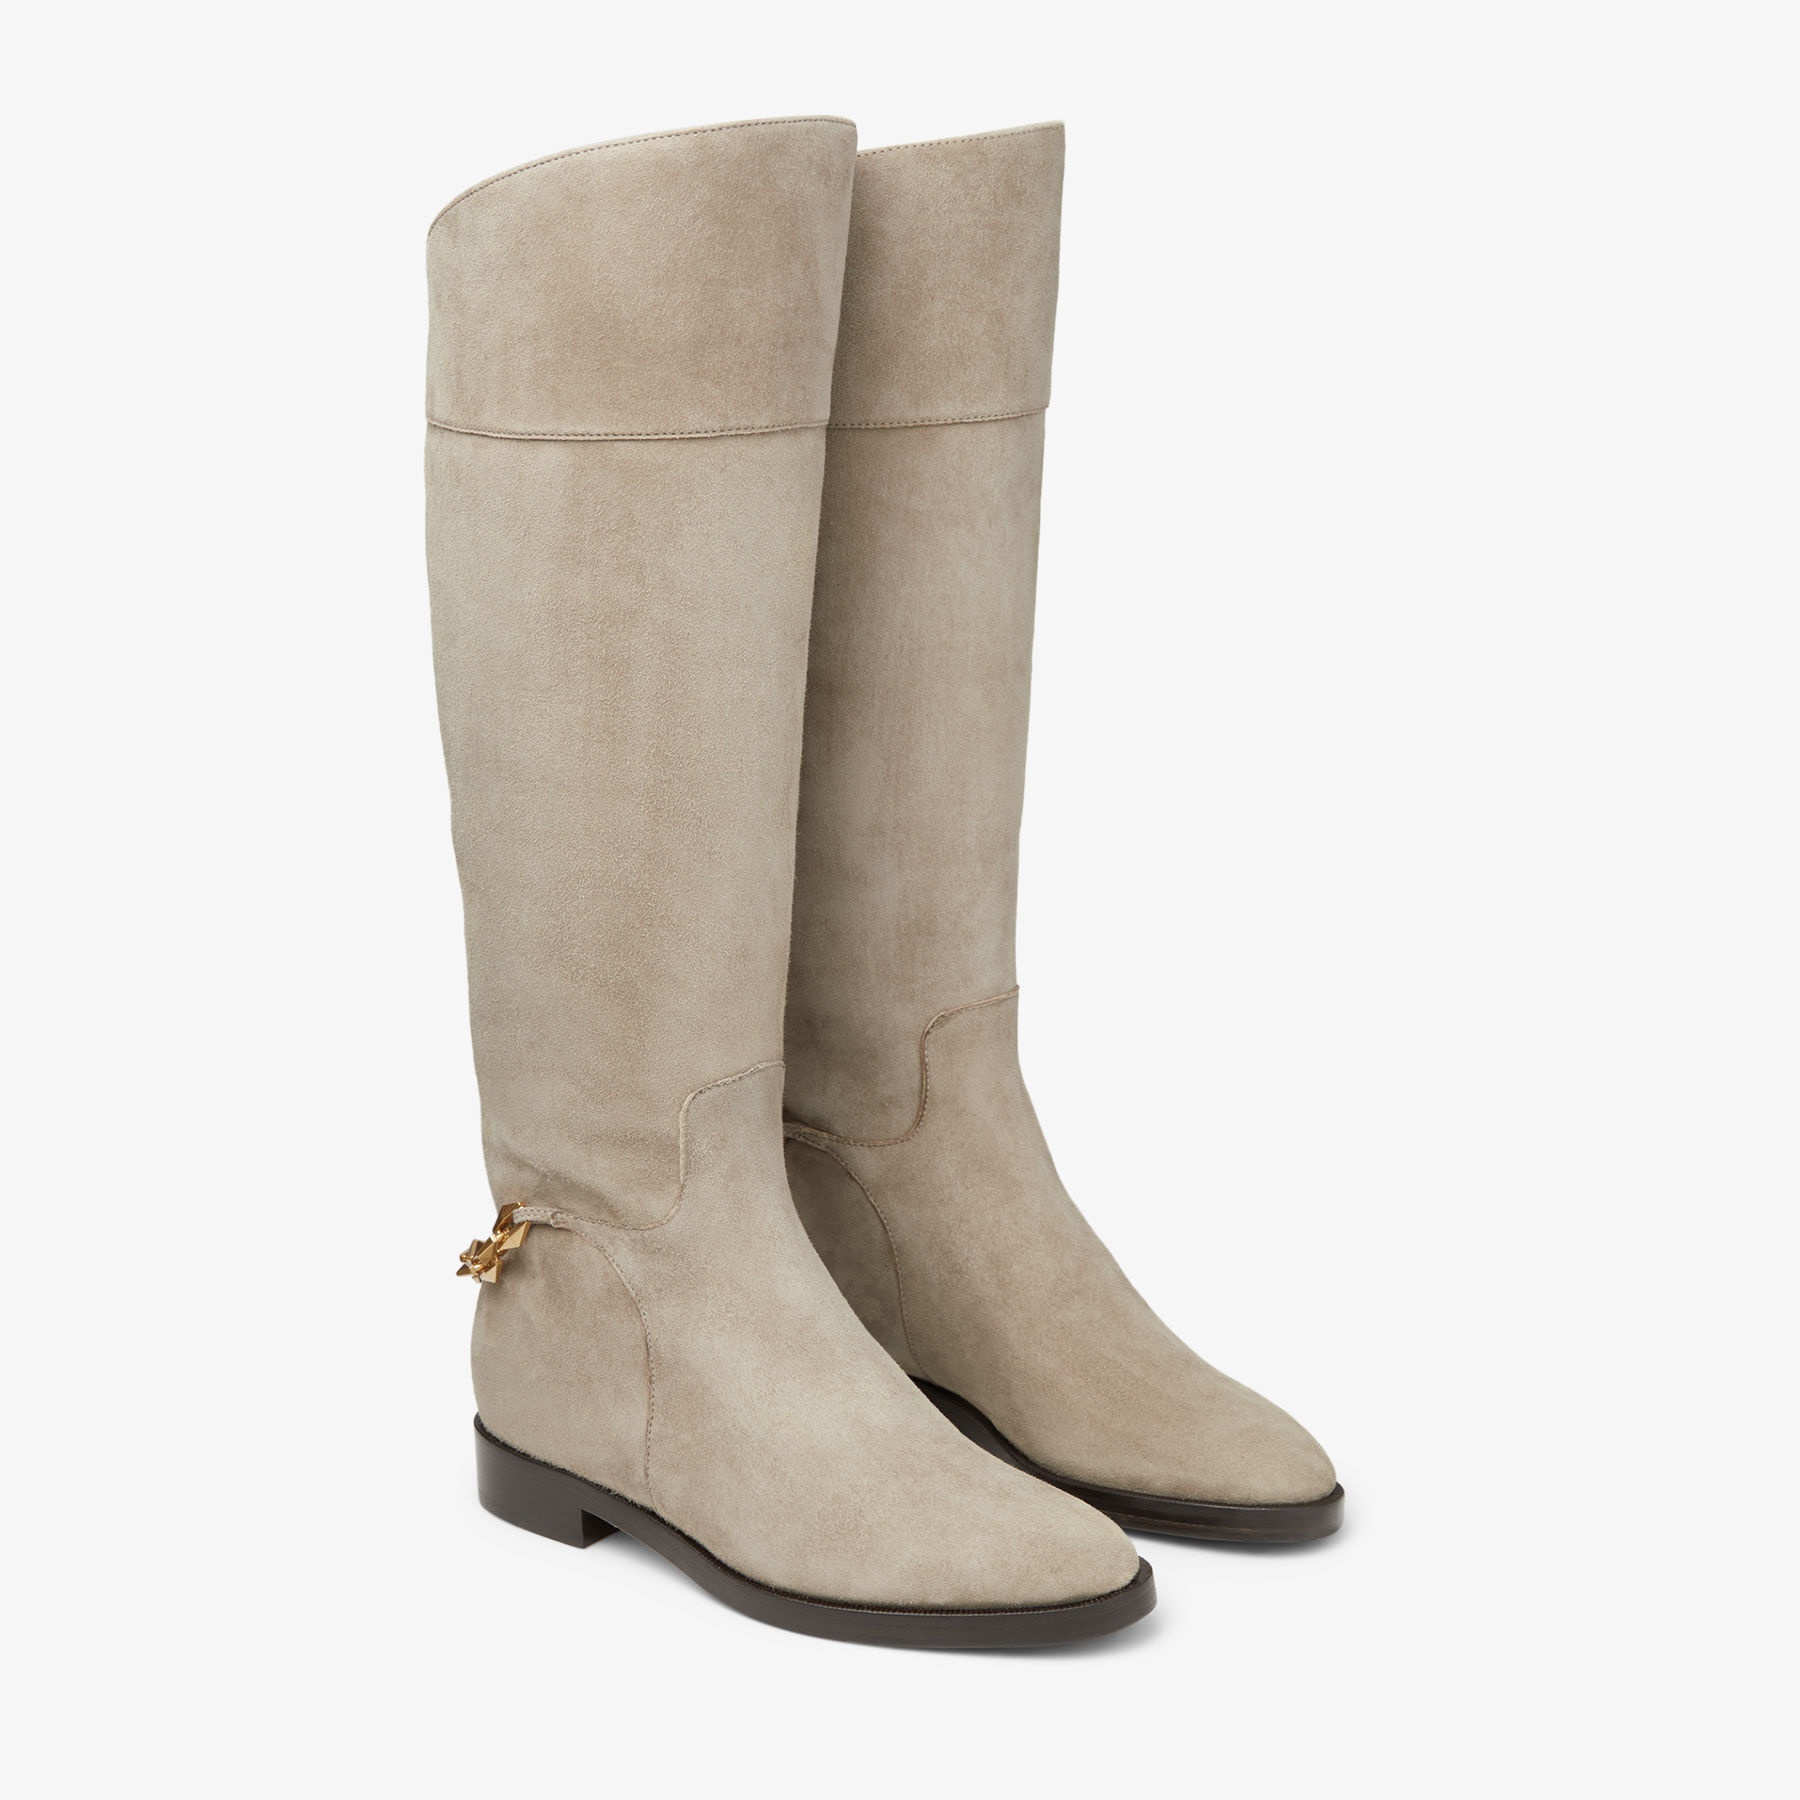 Nell Knee Boot Flat
Taupe Suede Knee-High Boots with Chain - 3